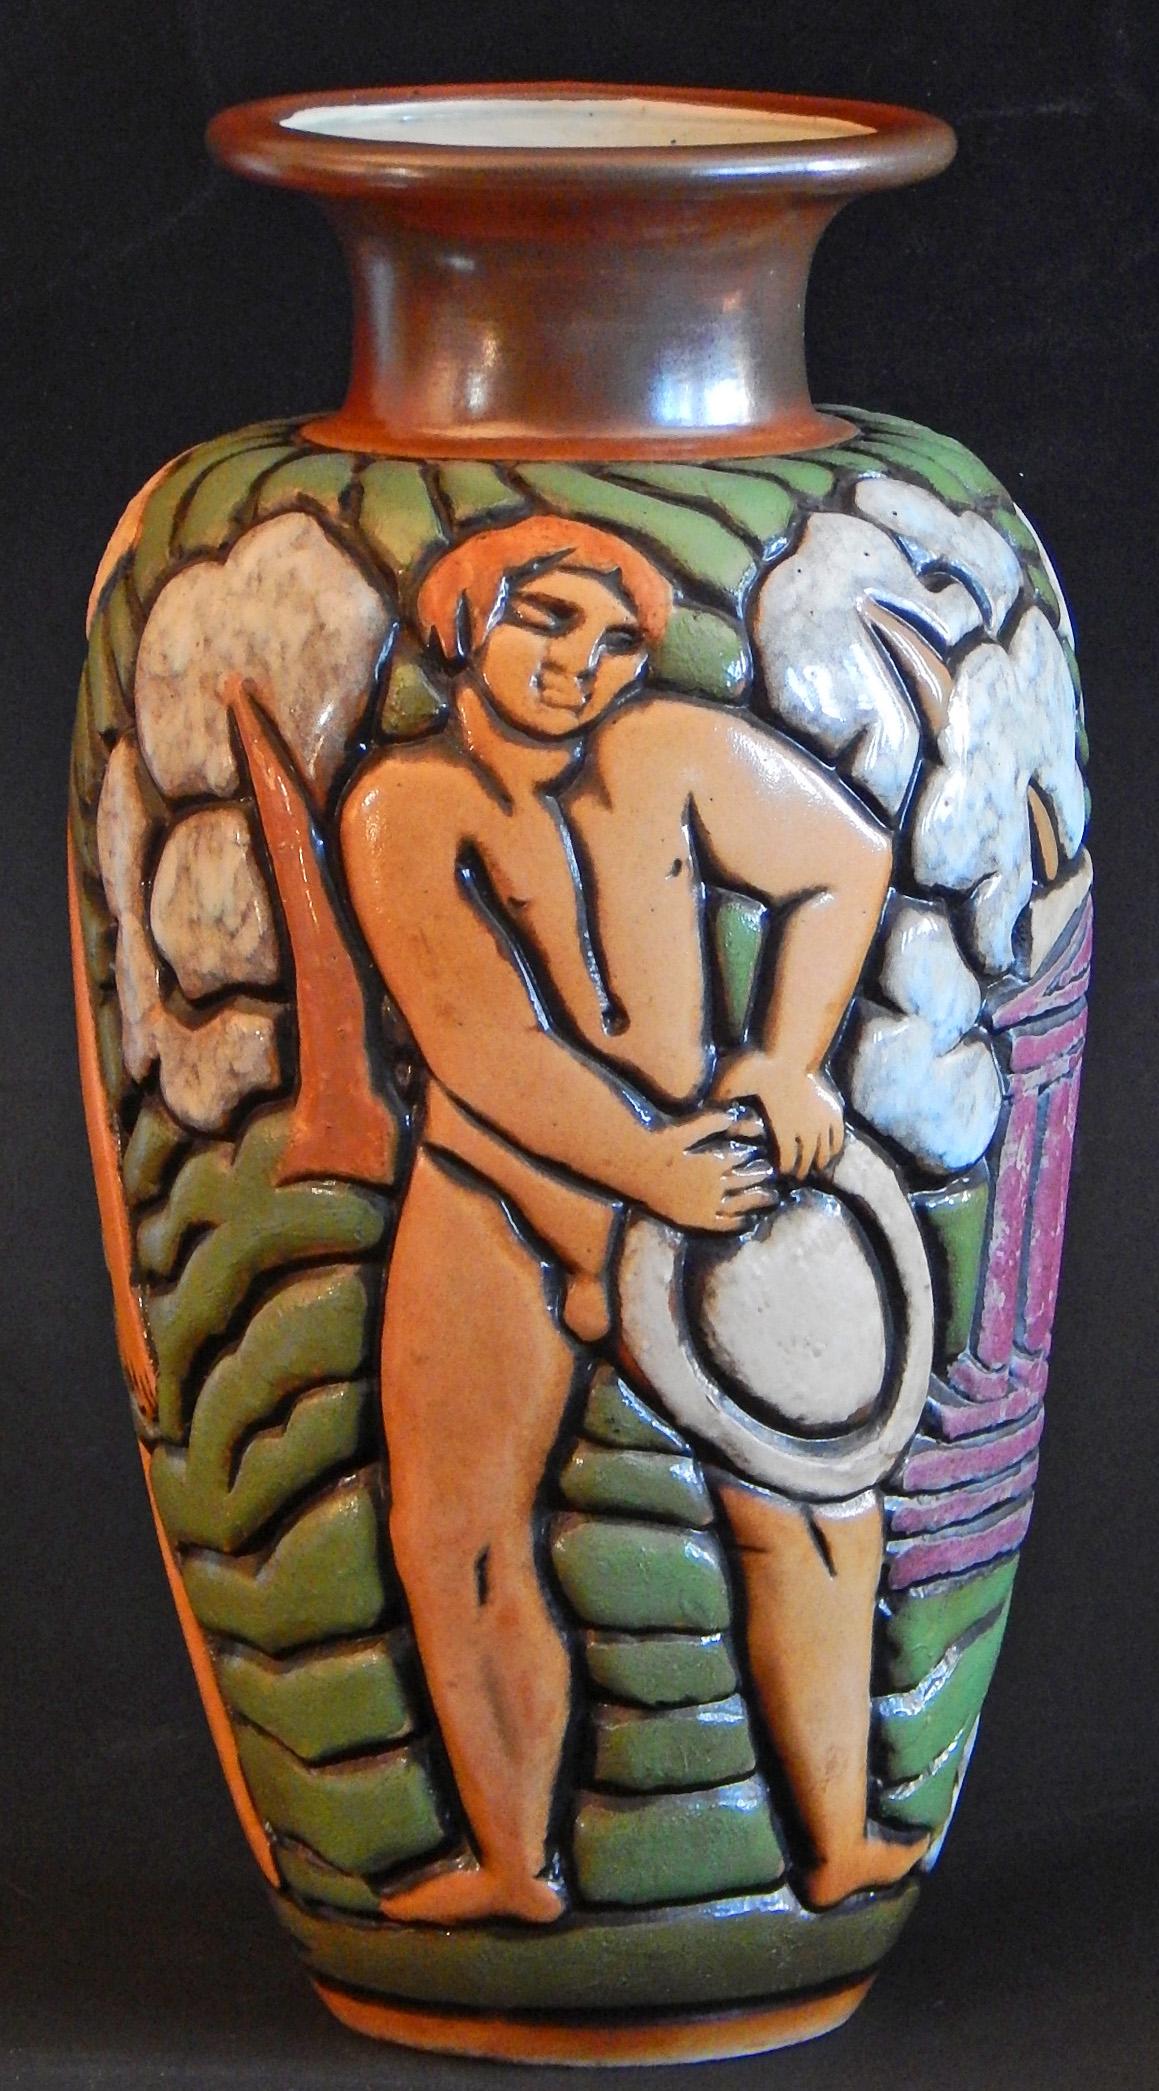 A large and striking Art Deco vase sculpted by Gaston Goor for the Mougin pottery works in France, this brilliantly-hued piece shows the production of terracotta elements for the facade of a building. Appropriately, a plum-colored Greek Revival